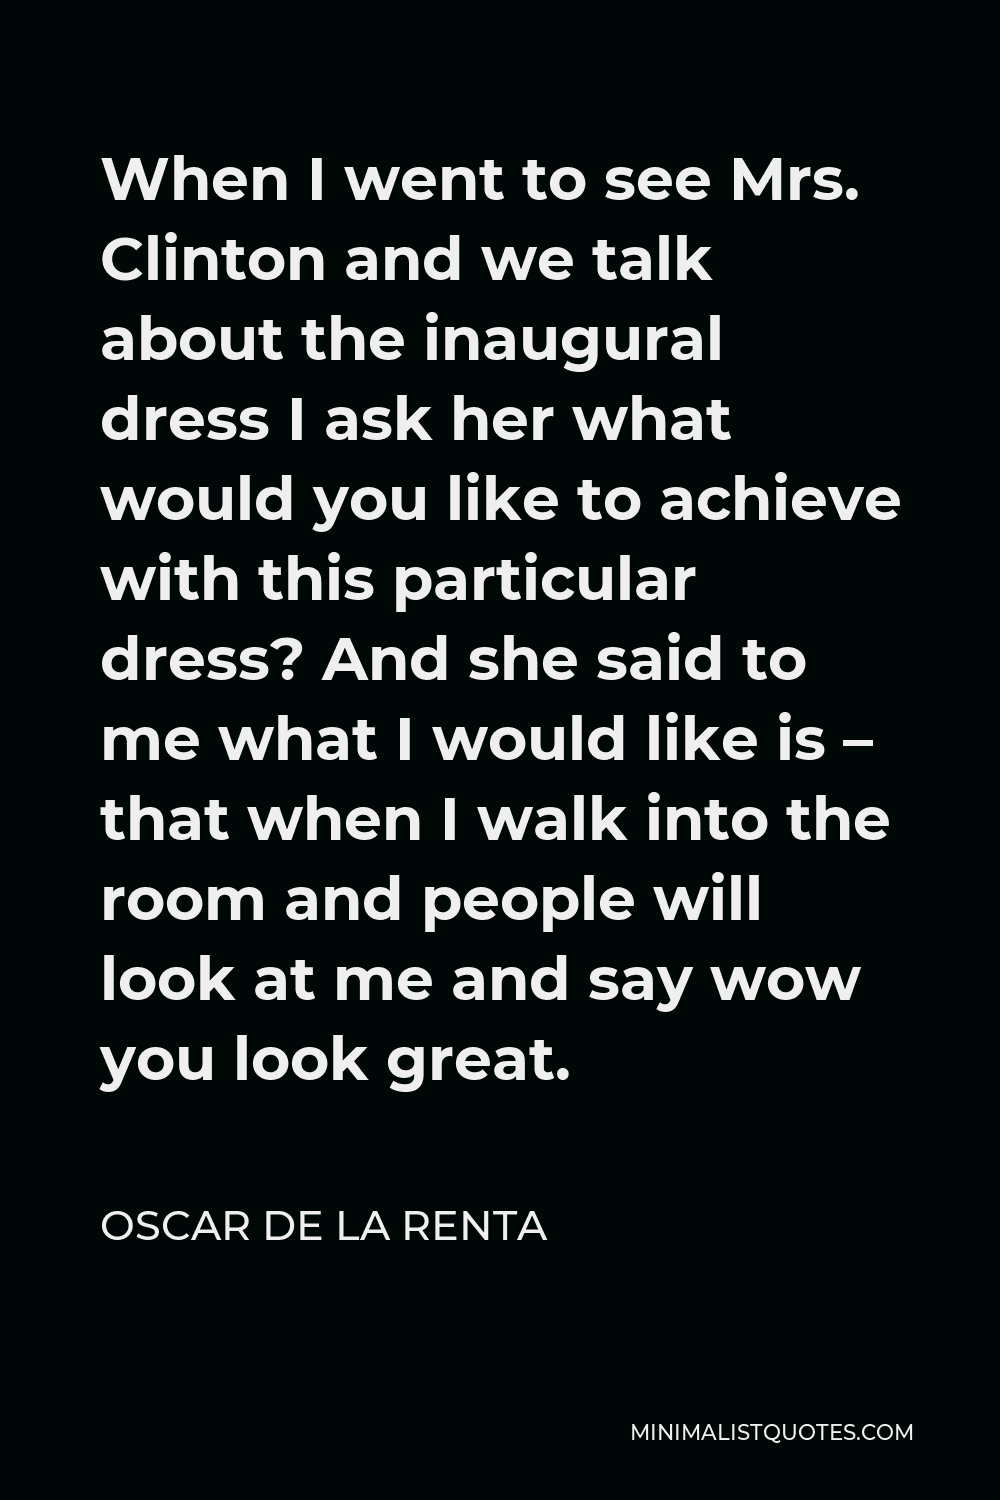 Oscar de la Renta Quote - When I went to see Mrs. Clinton and we talk about the inaugural dress I ask her what would you like to achieve with this particular dress? And she said to me what I would like is – that when I walk into the room and people will look at me and say wow you look great.